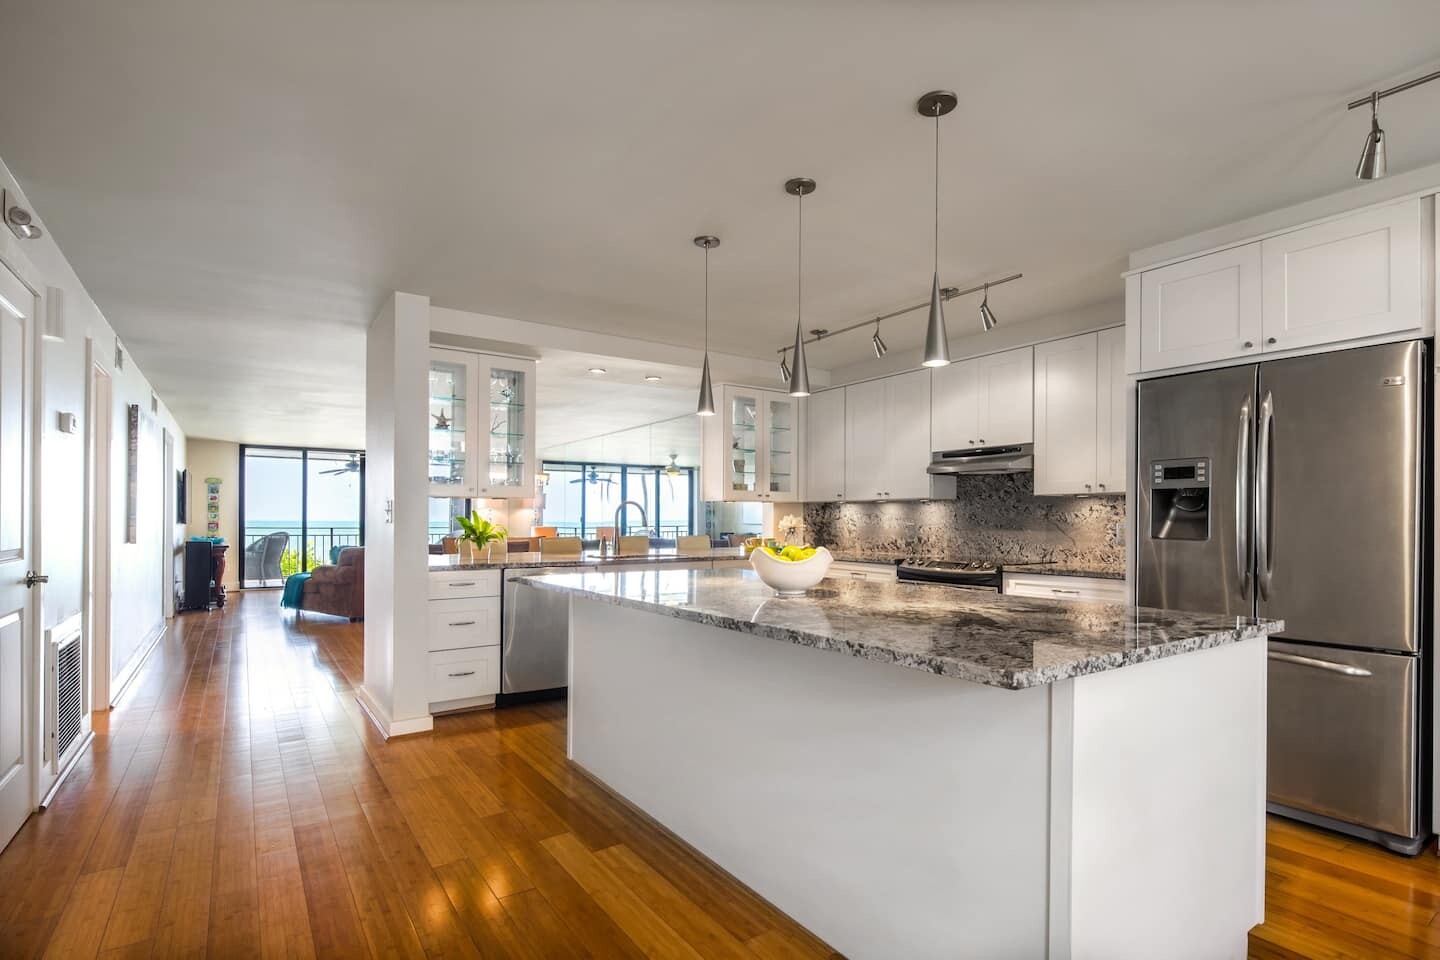 The white kitchen inside an Airbnb condo